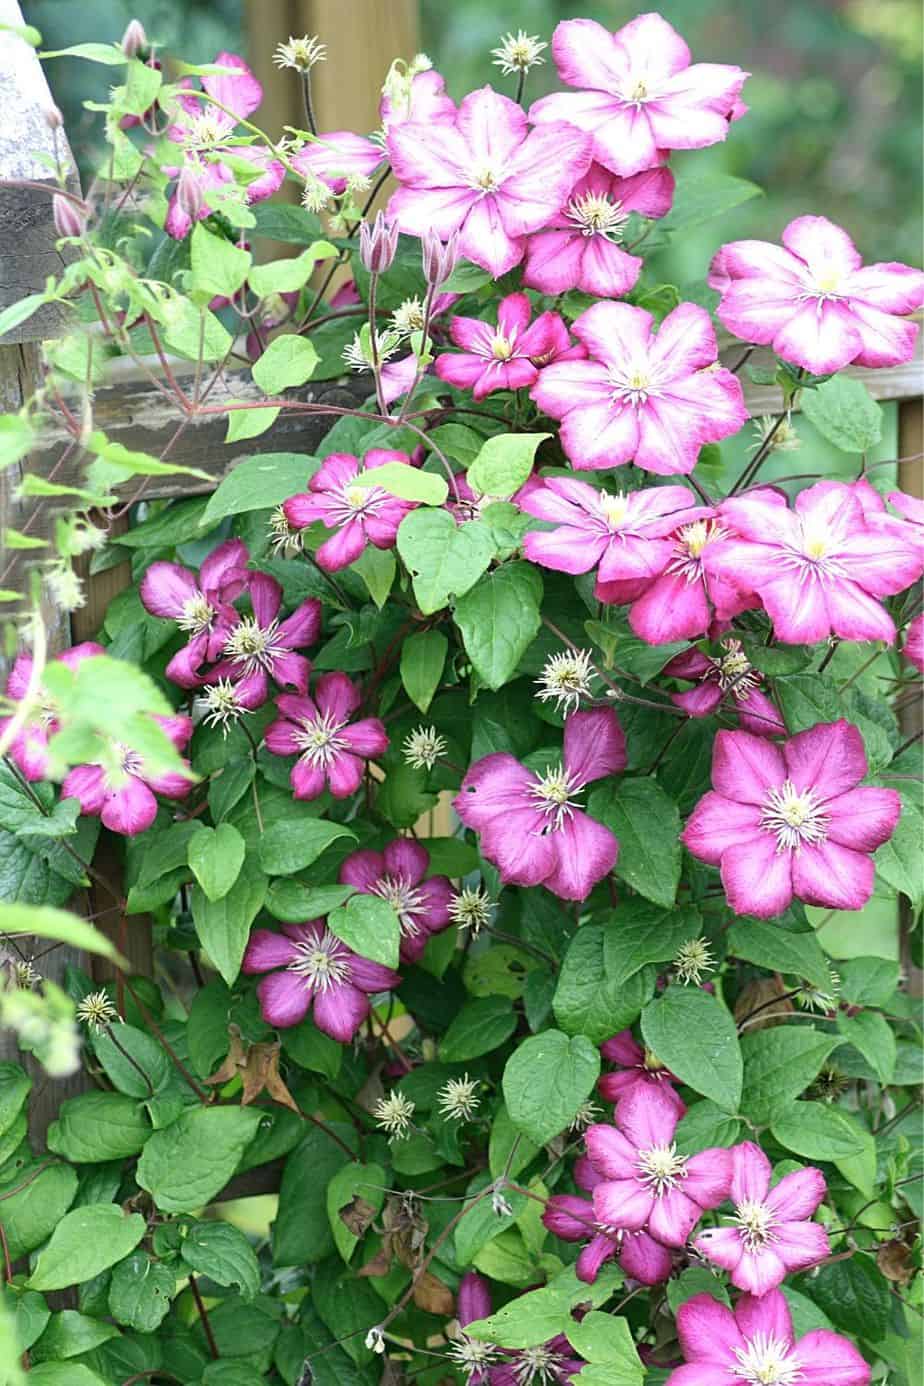 Clematis is part of a collection of plants you can grow for privacy